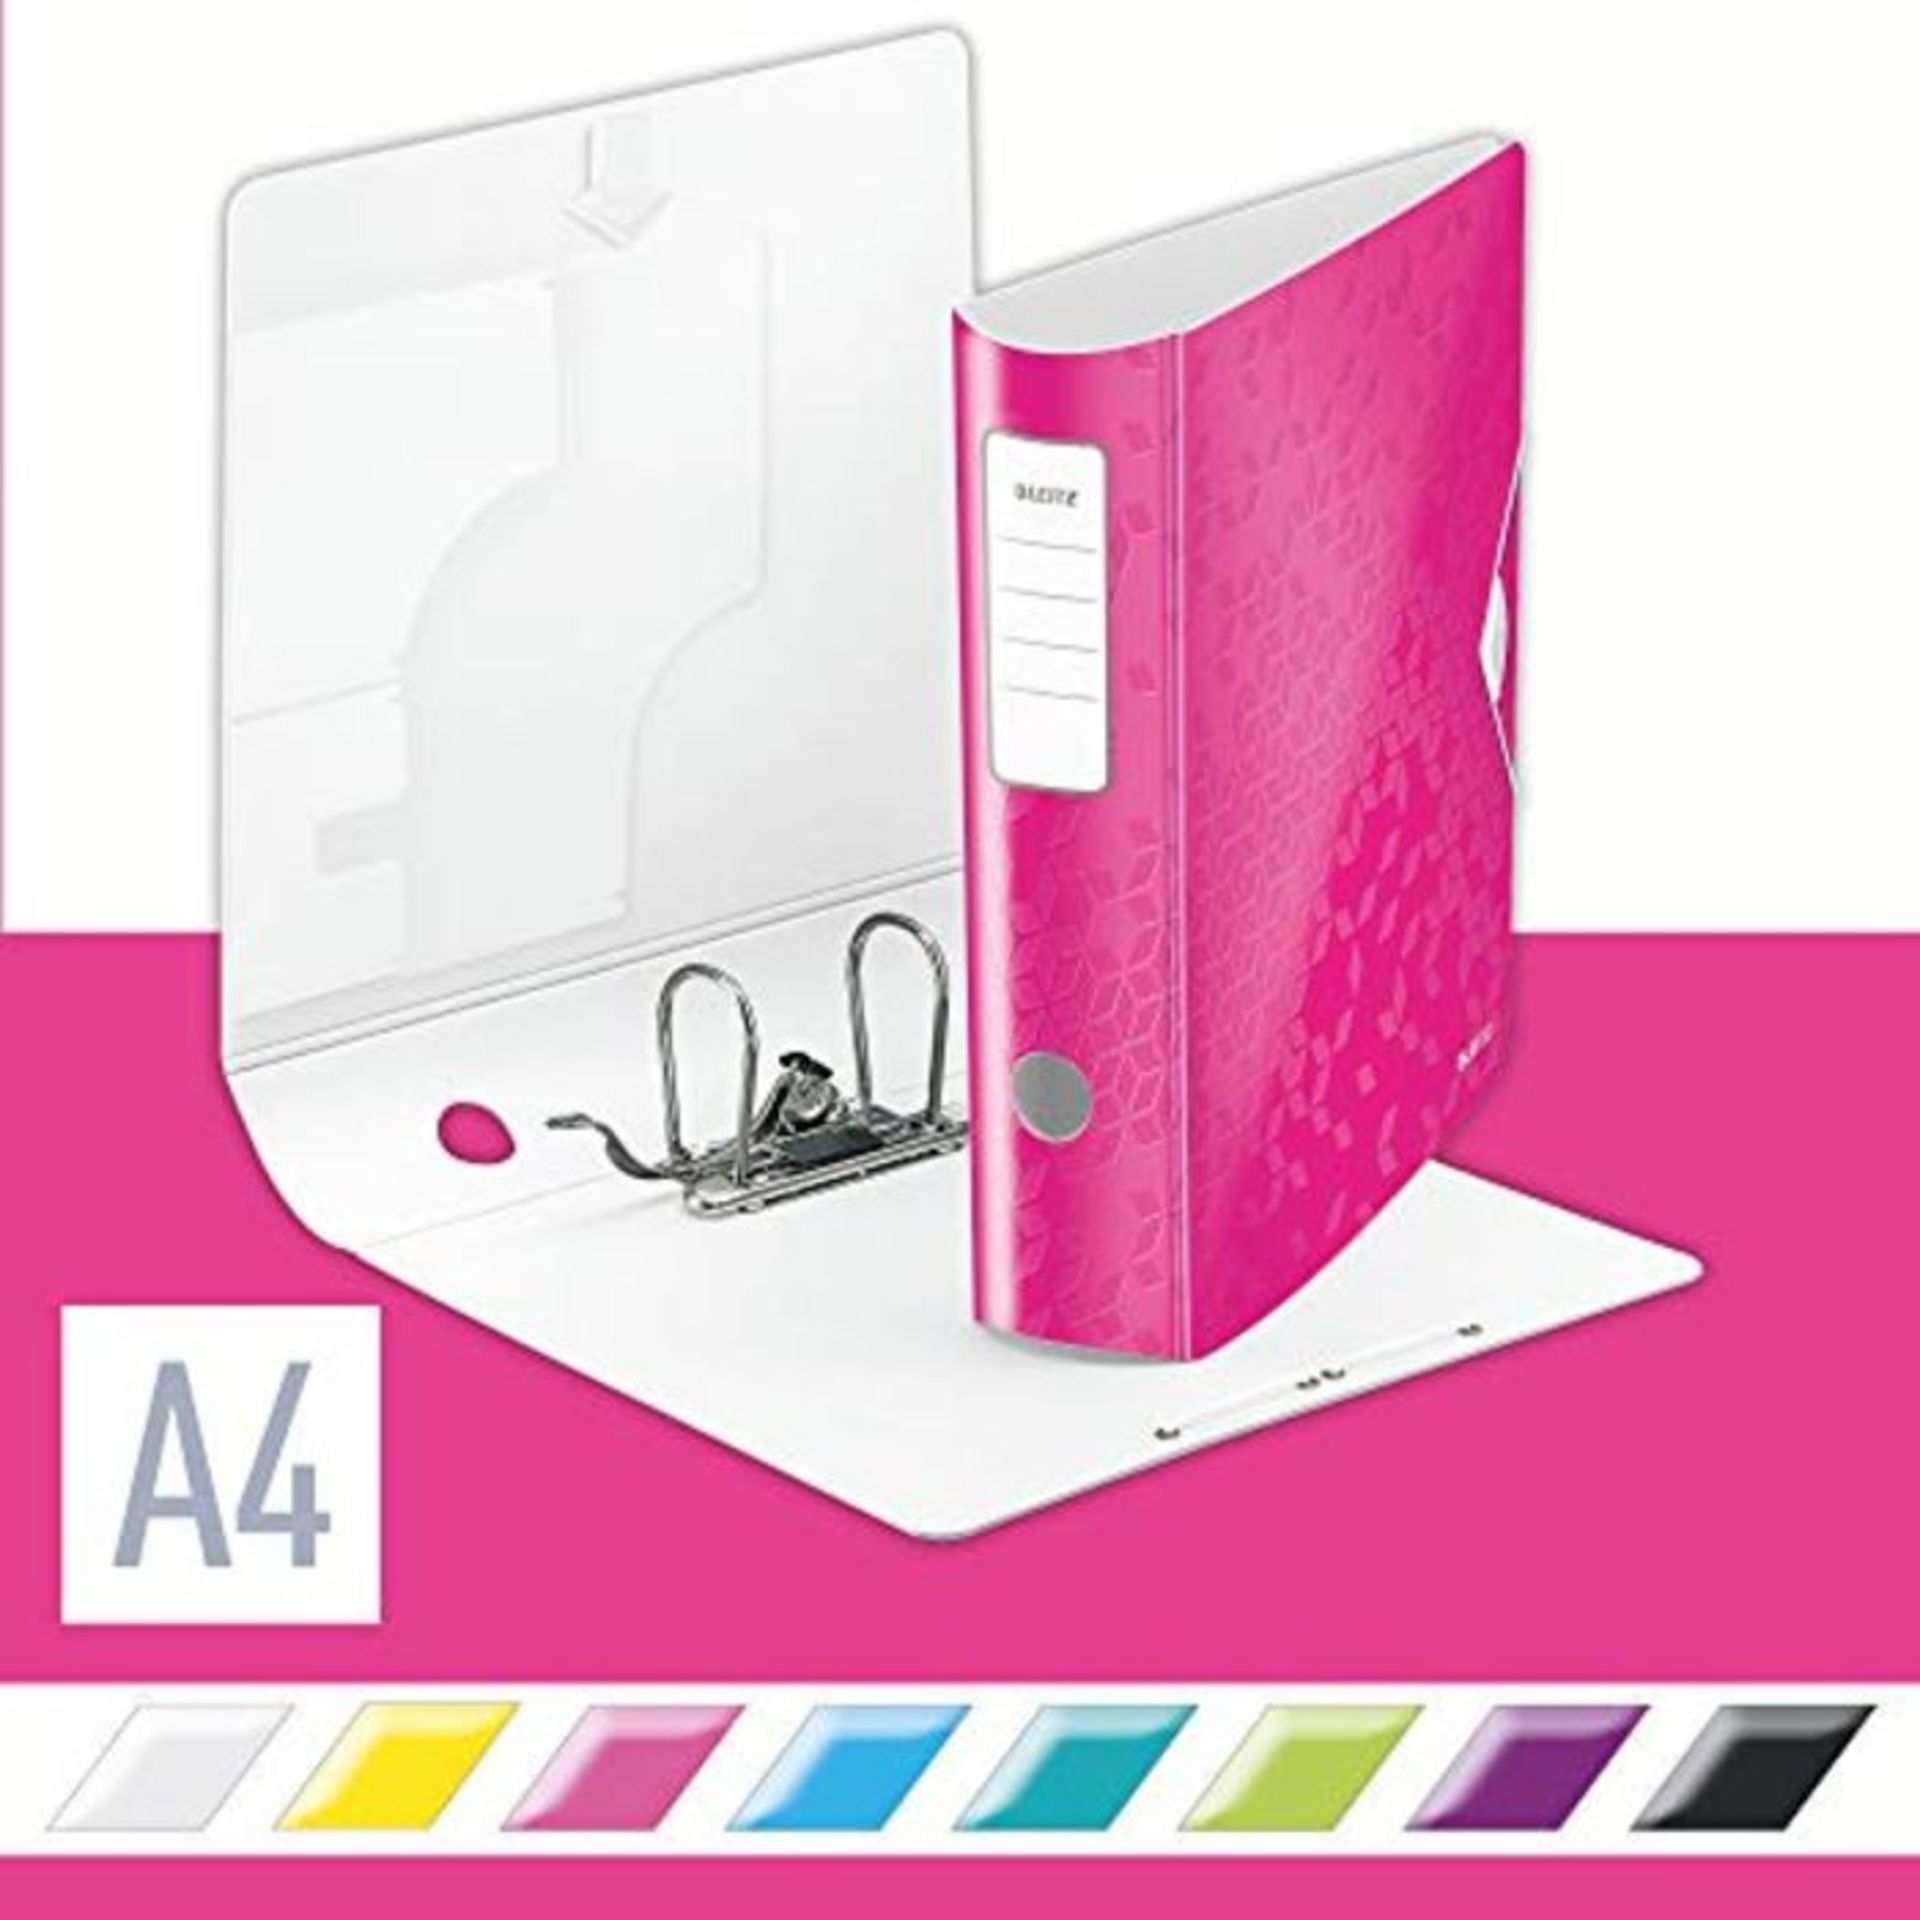 Leitz Lever Arch File, Metallic pink, A4, Curved spine 75mm width, Elastic fastening,